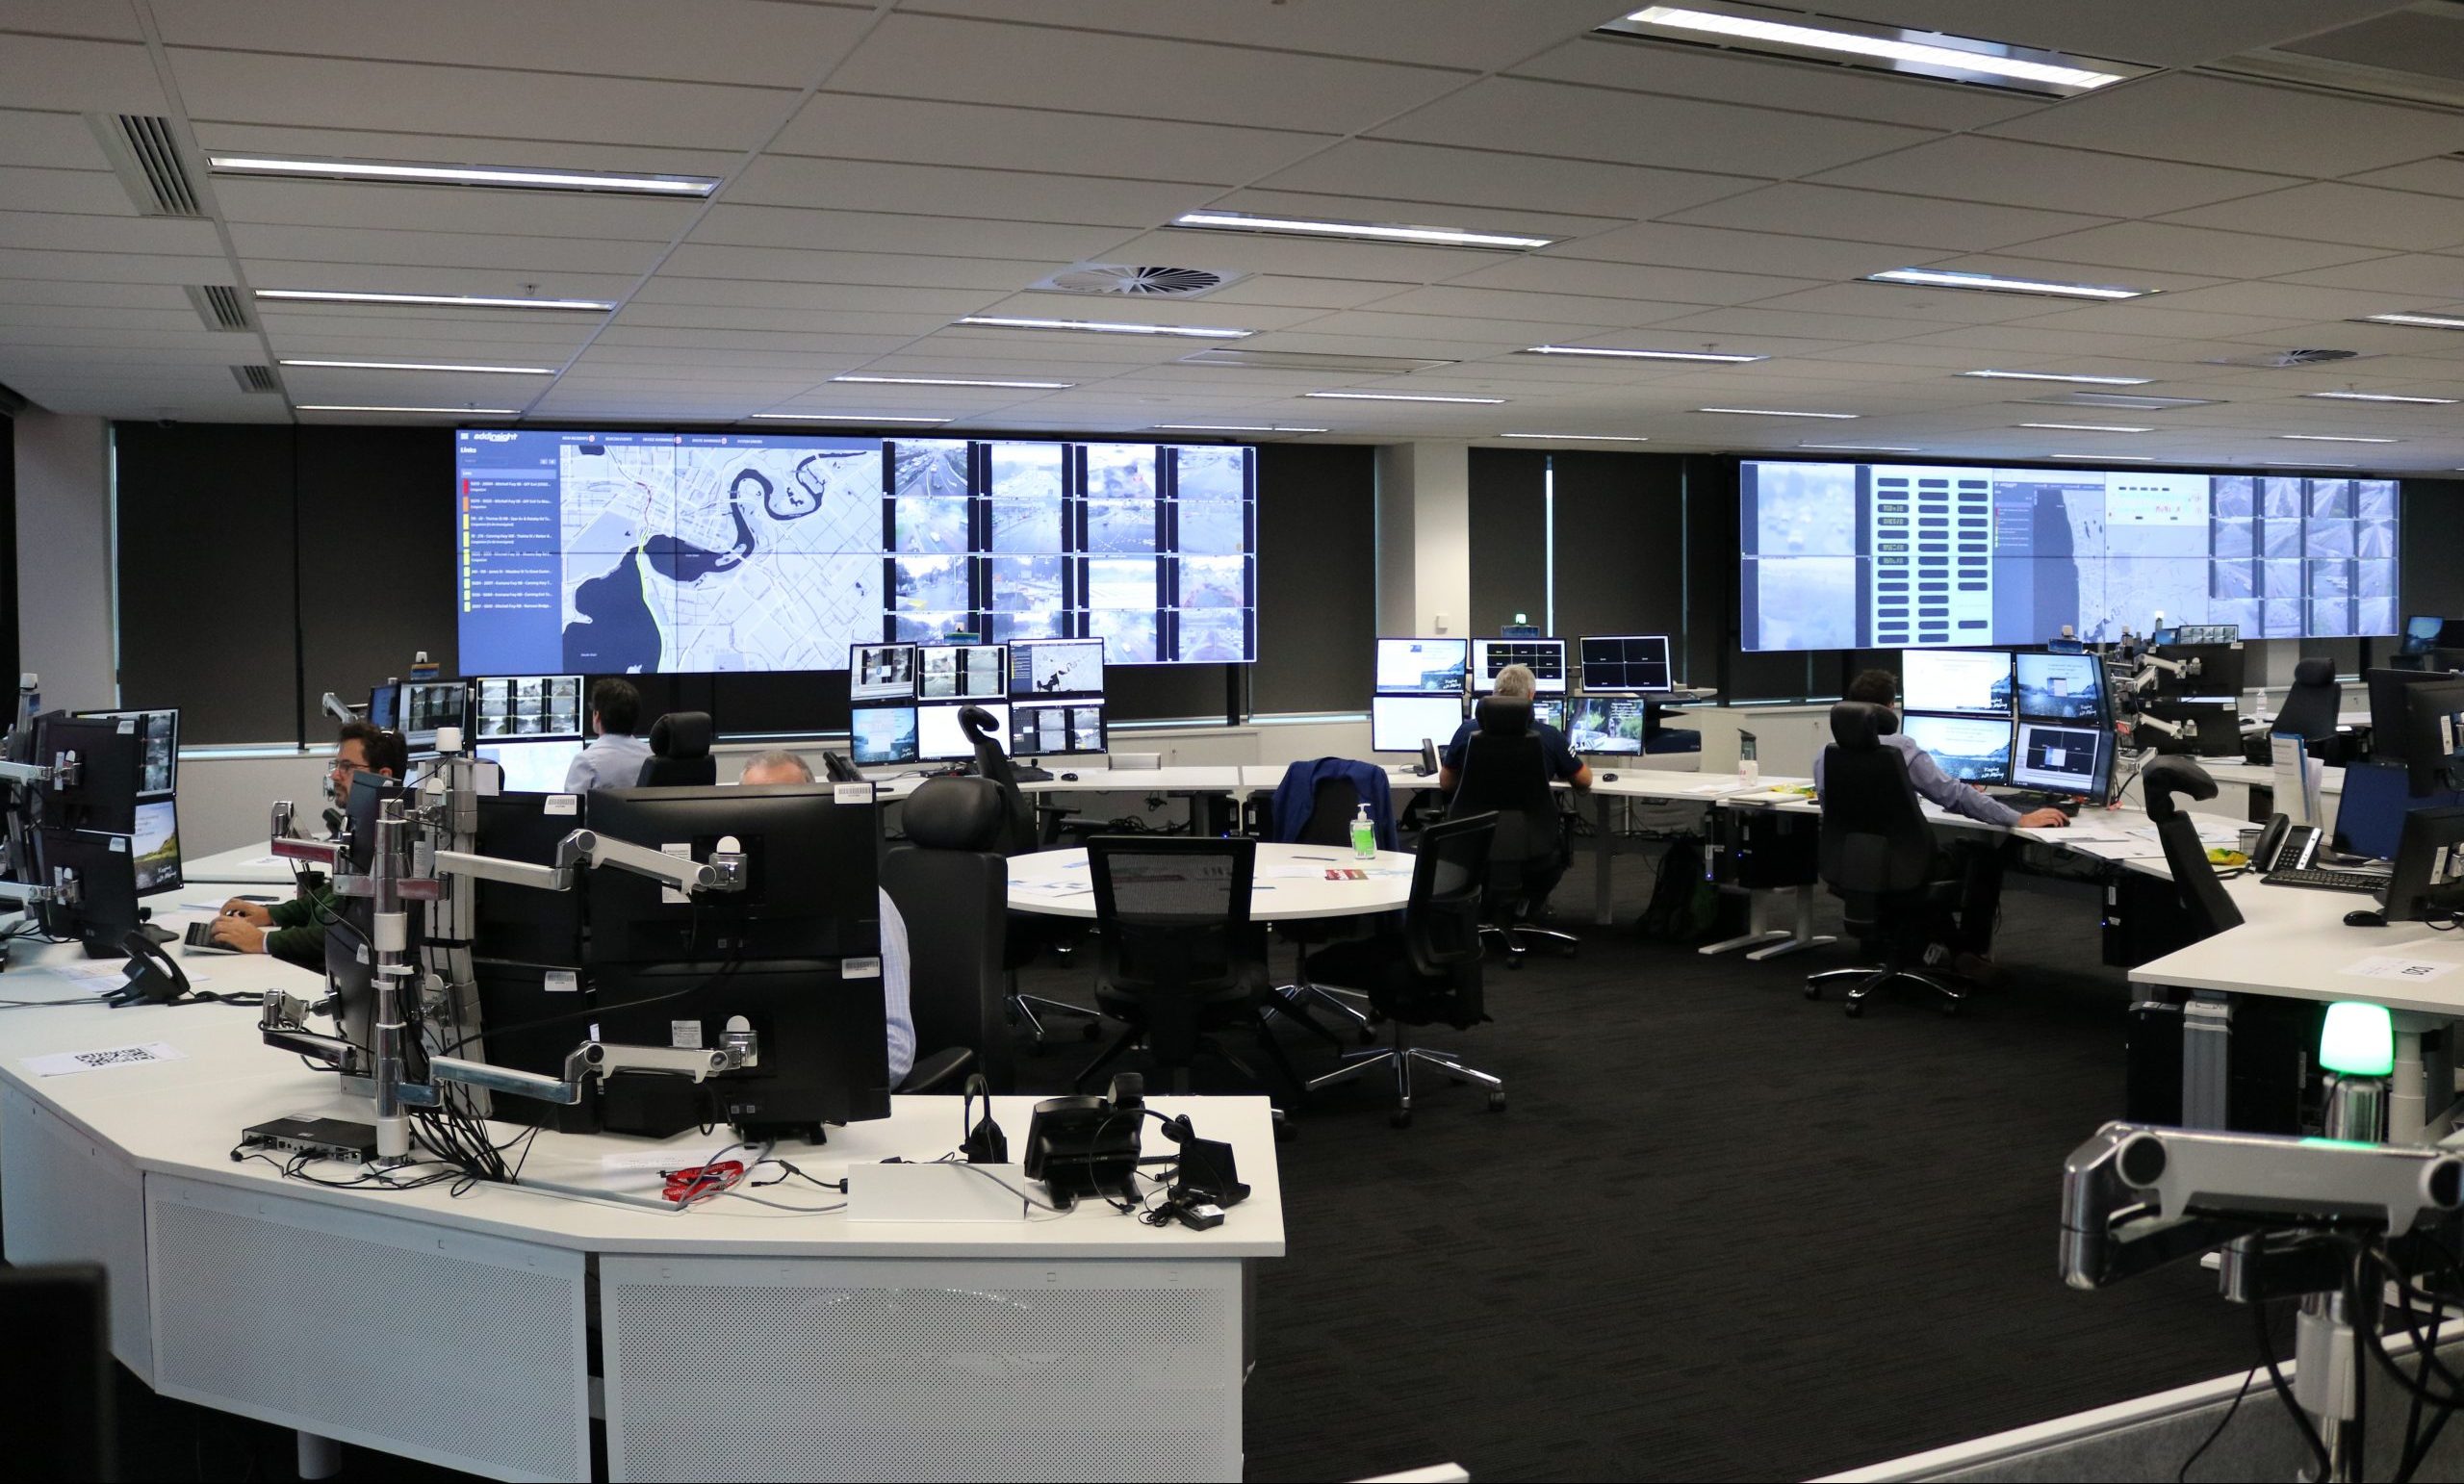 The main roads real-time operations control room in Perth, Western Australia